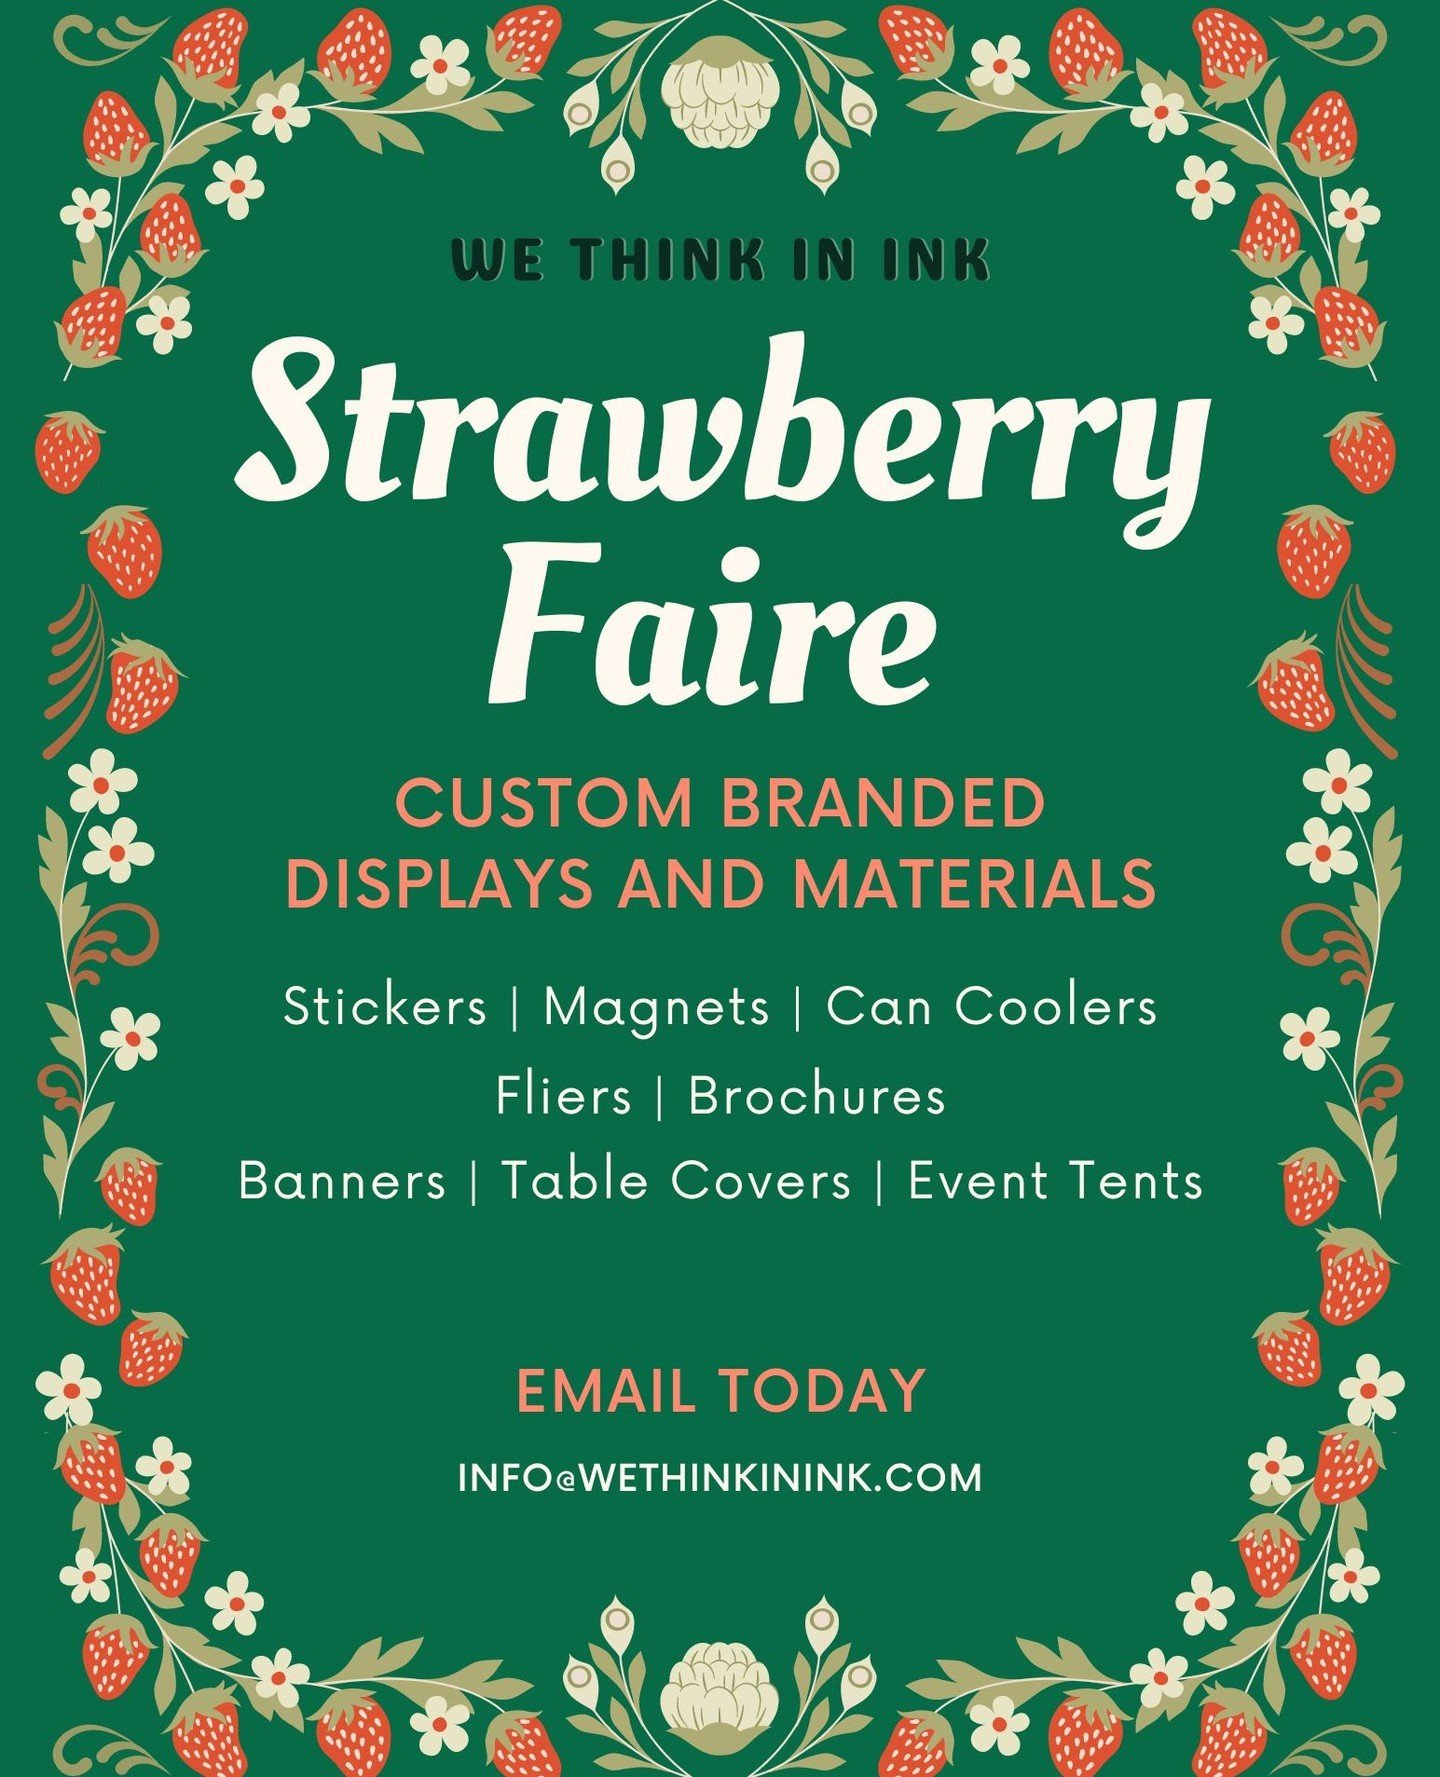 🍓The Strawberry Faire is June 1st! We've got you covered with everything you may need to leave a lasting impression. Get in touch today to guarantee delivery before the event!